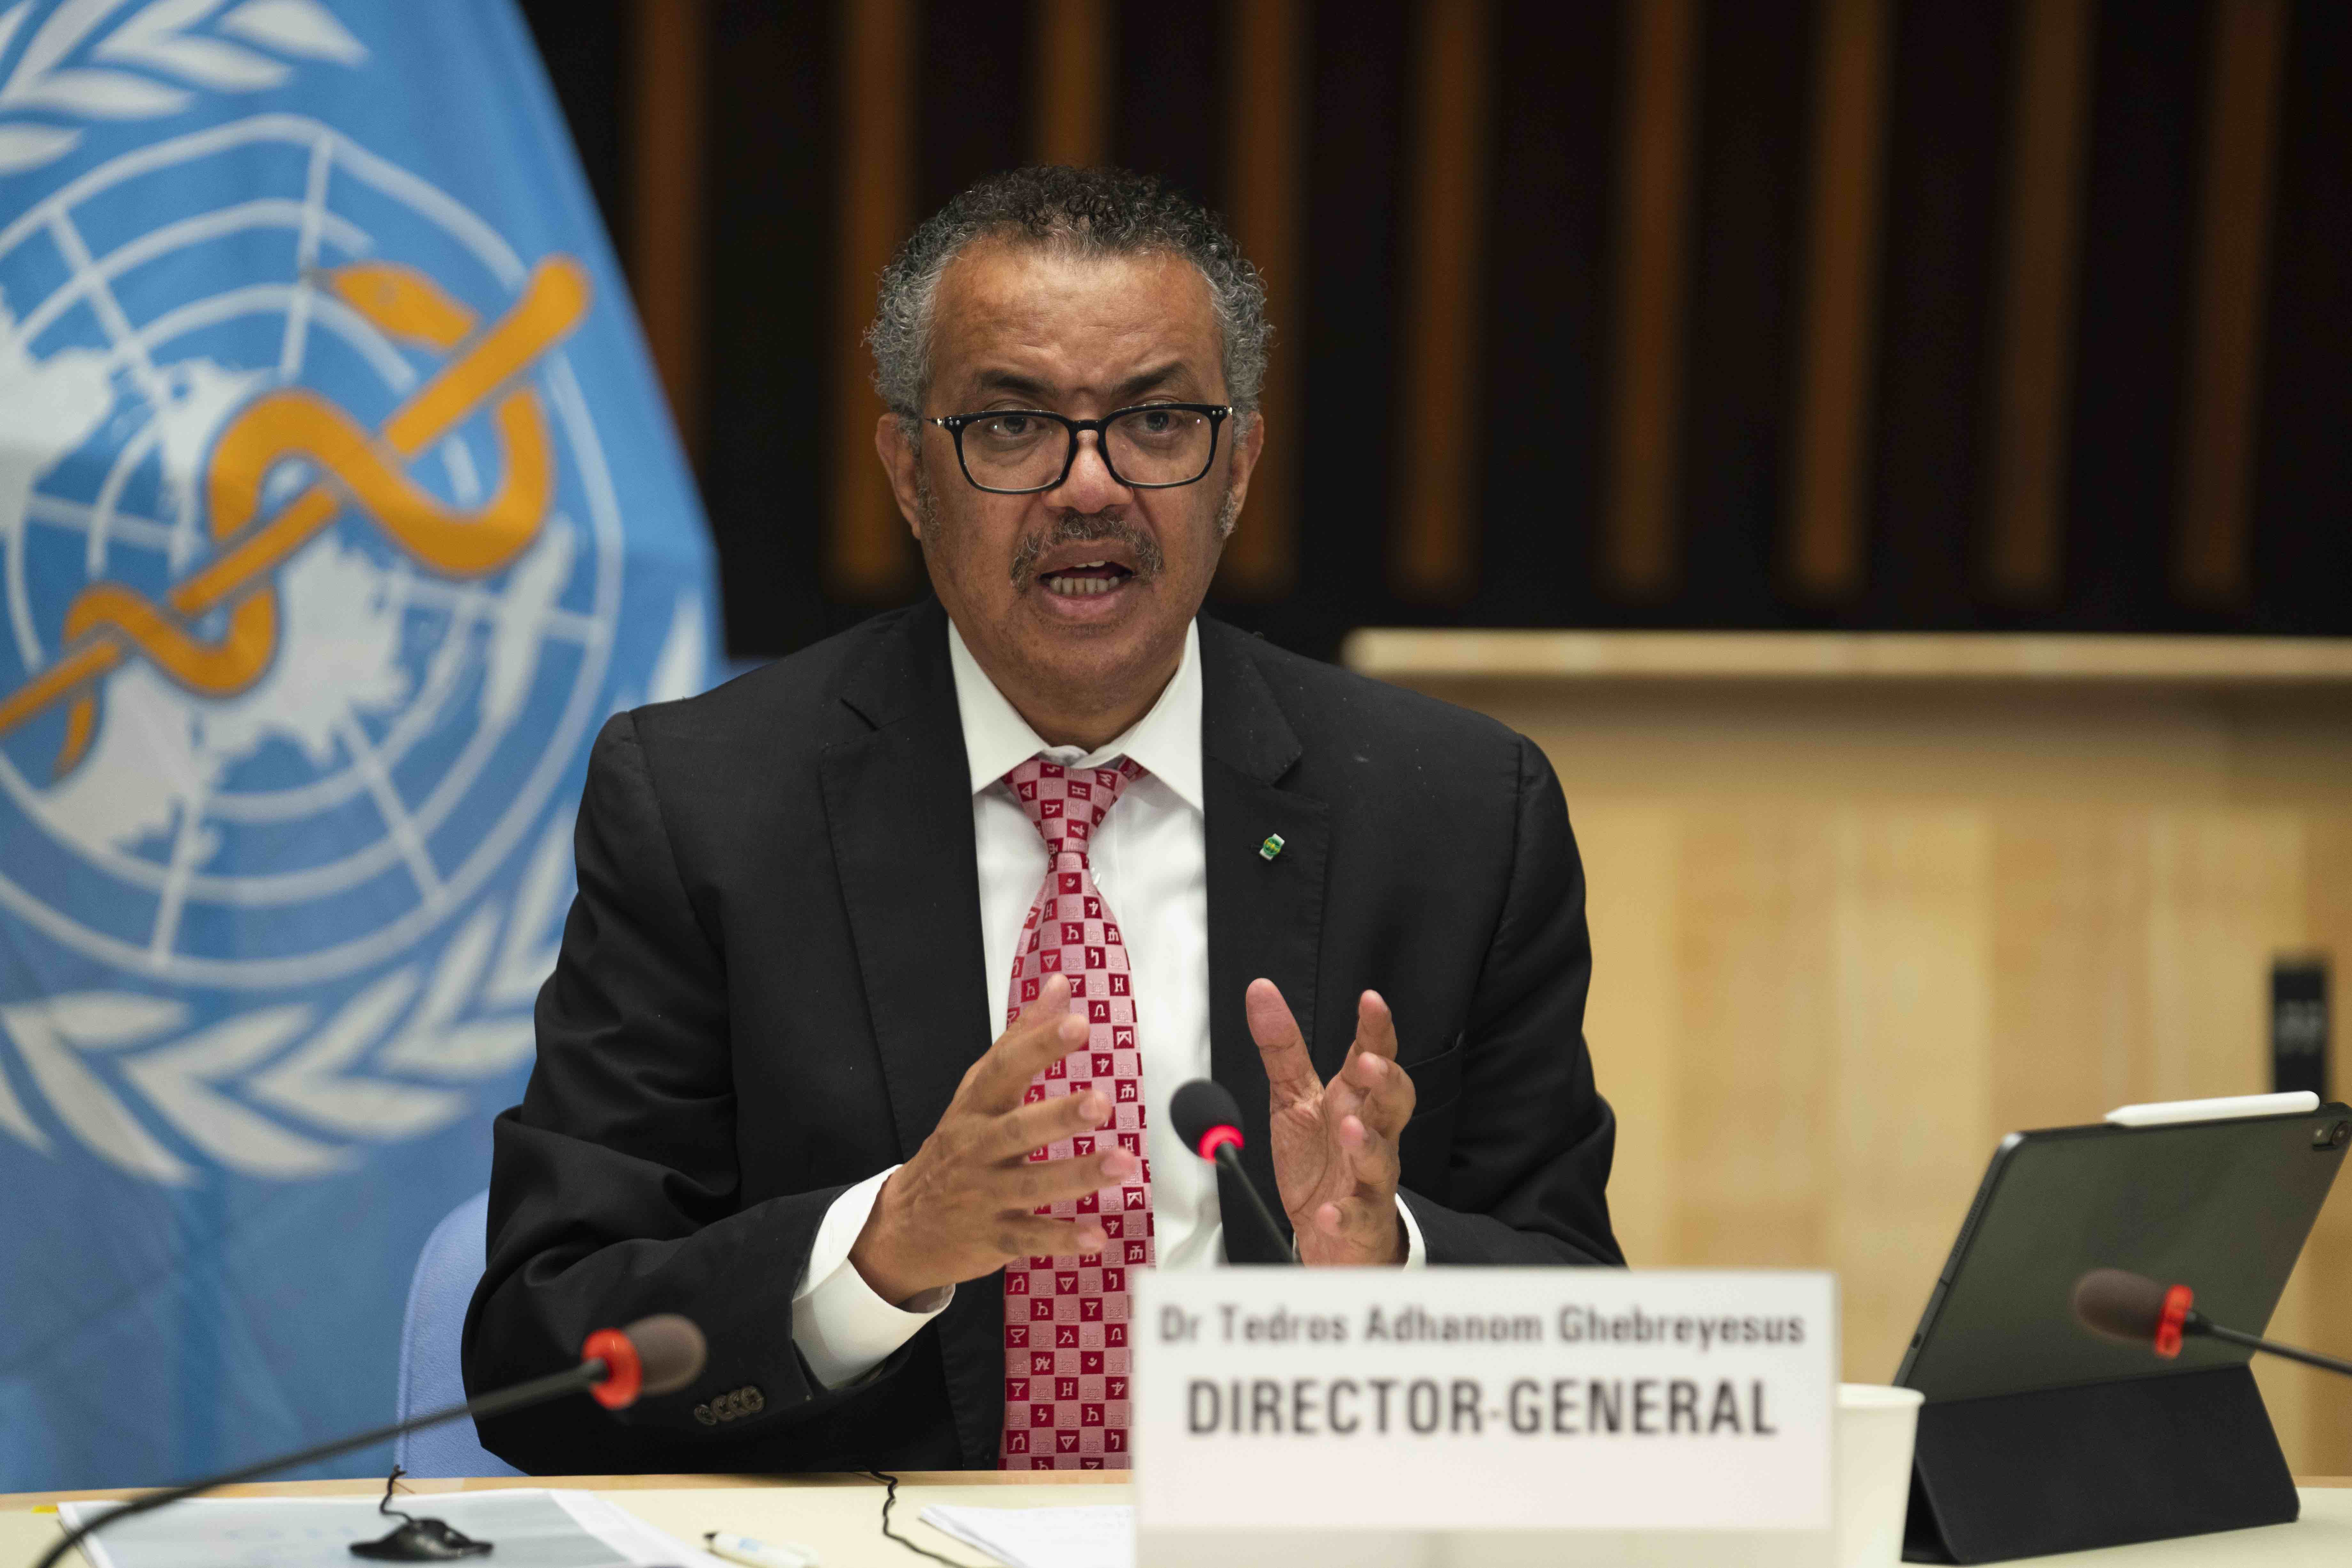 Follow-up to the high-level meetings of the United Nations General Assembly on NCDs